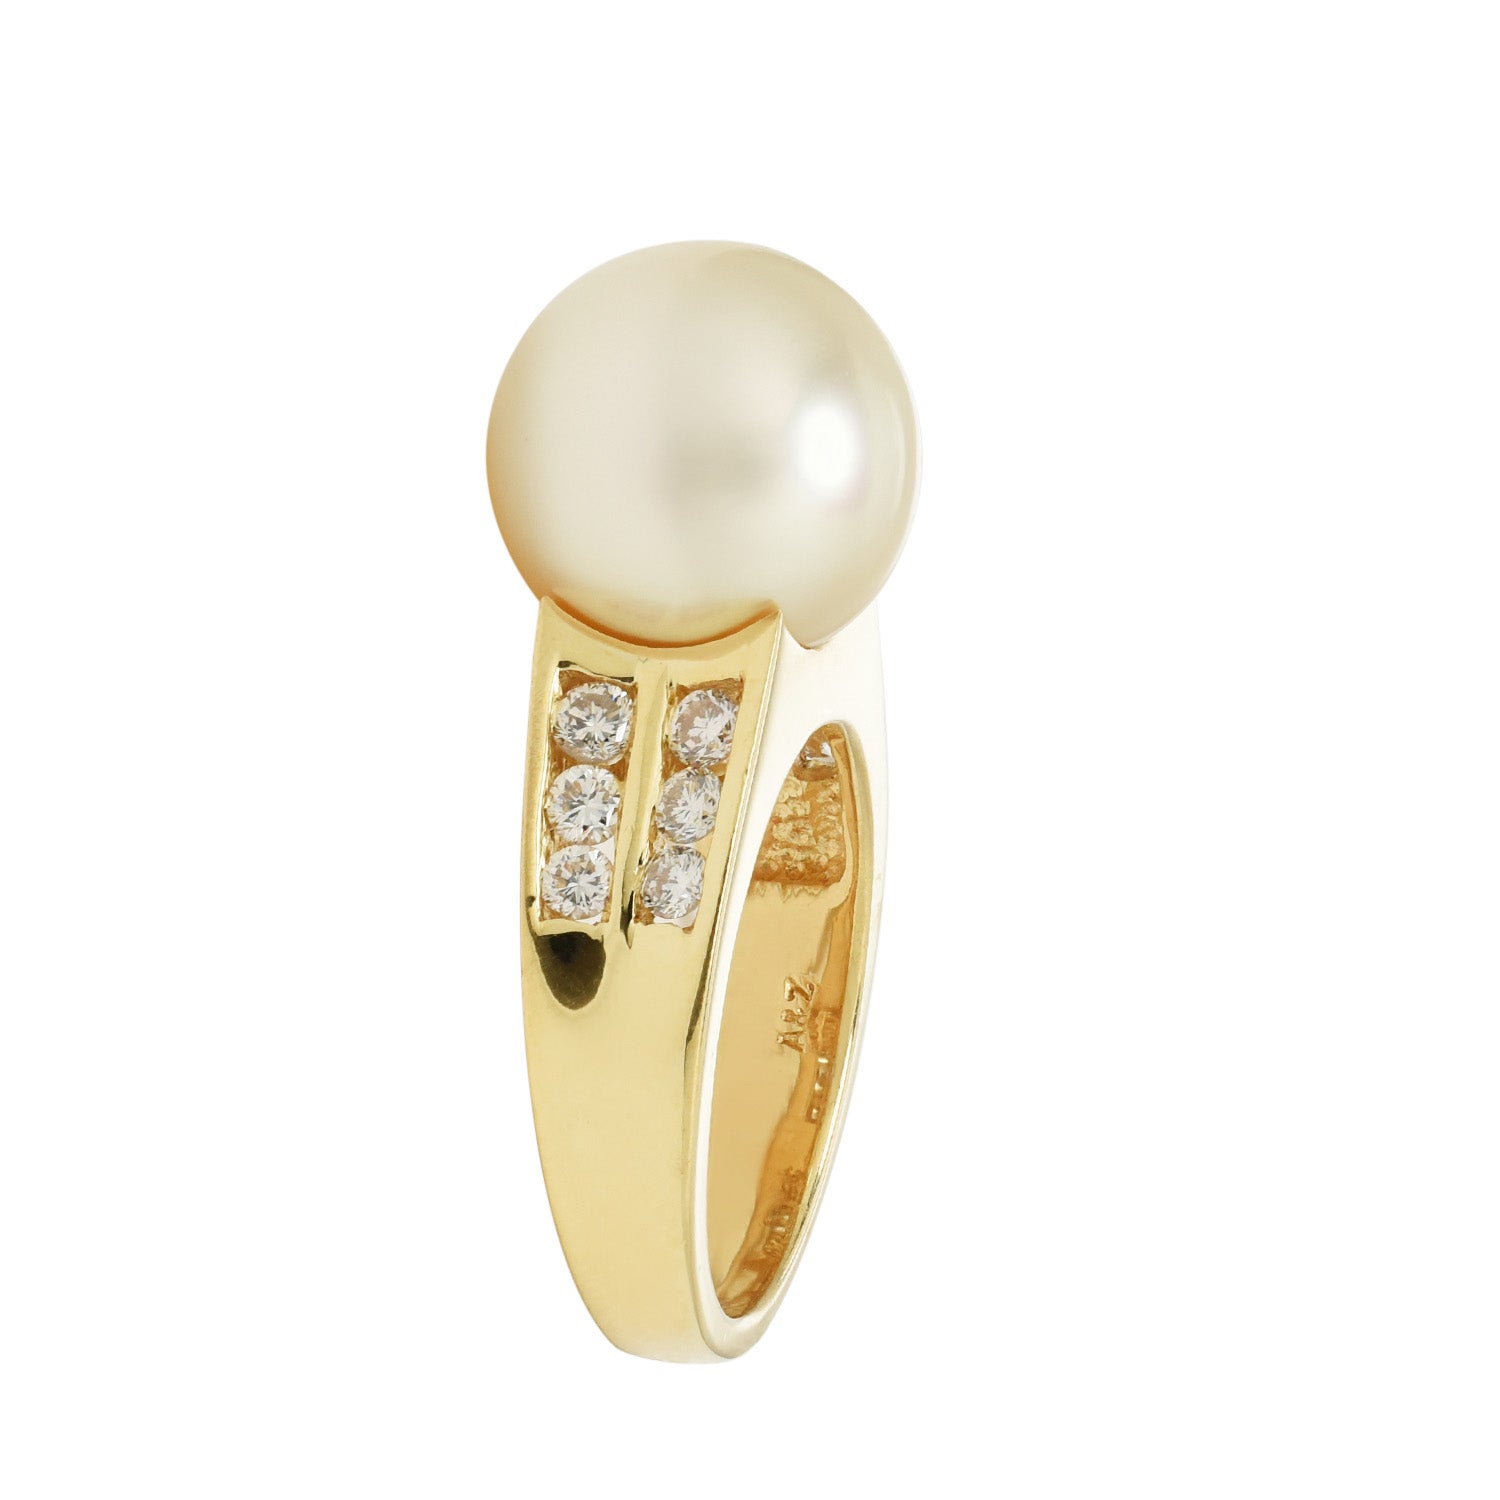 South Sea Pearl Ring in 18kt Yellow Gold with Diamonds (.56ct tw and 12mm pearl)